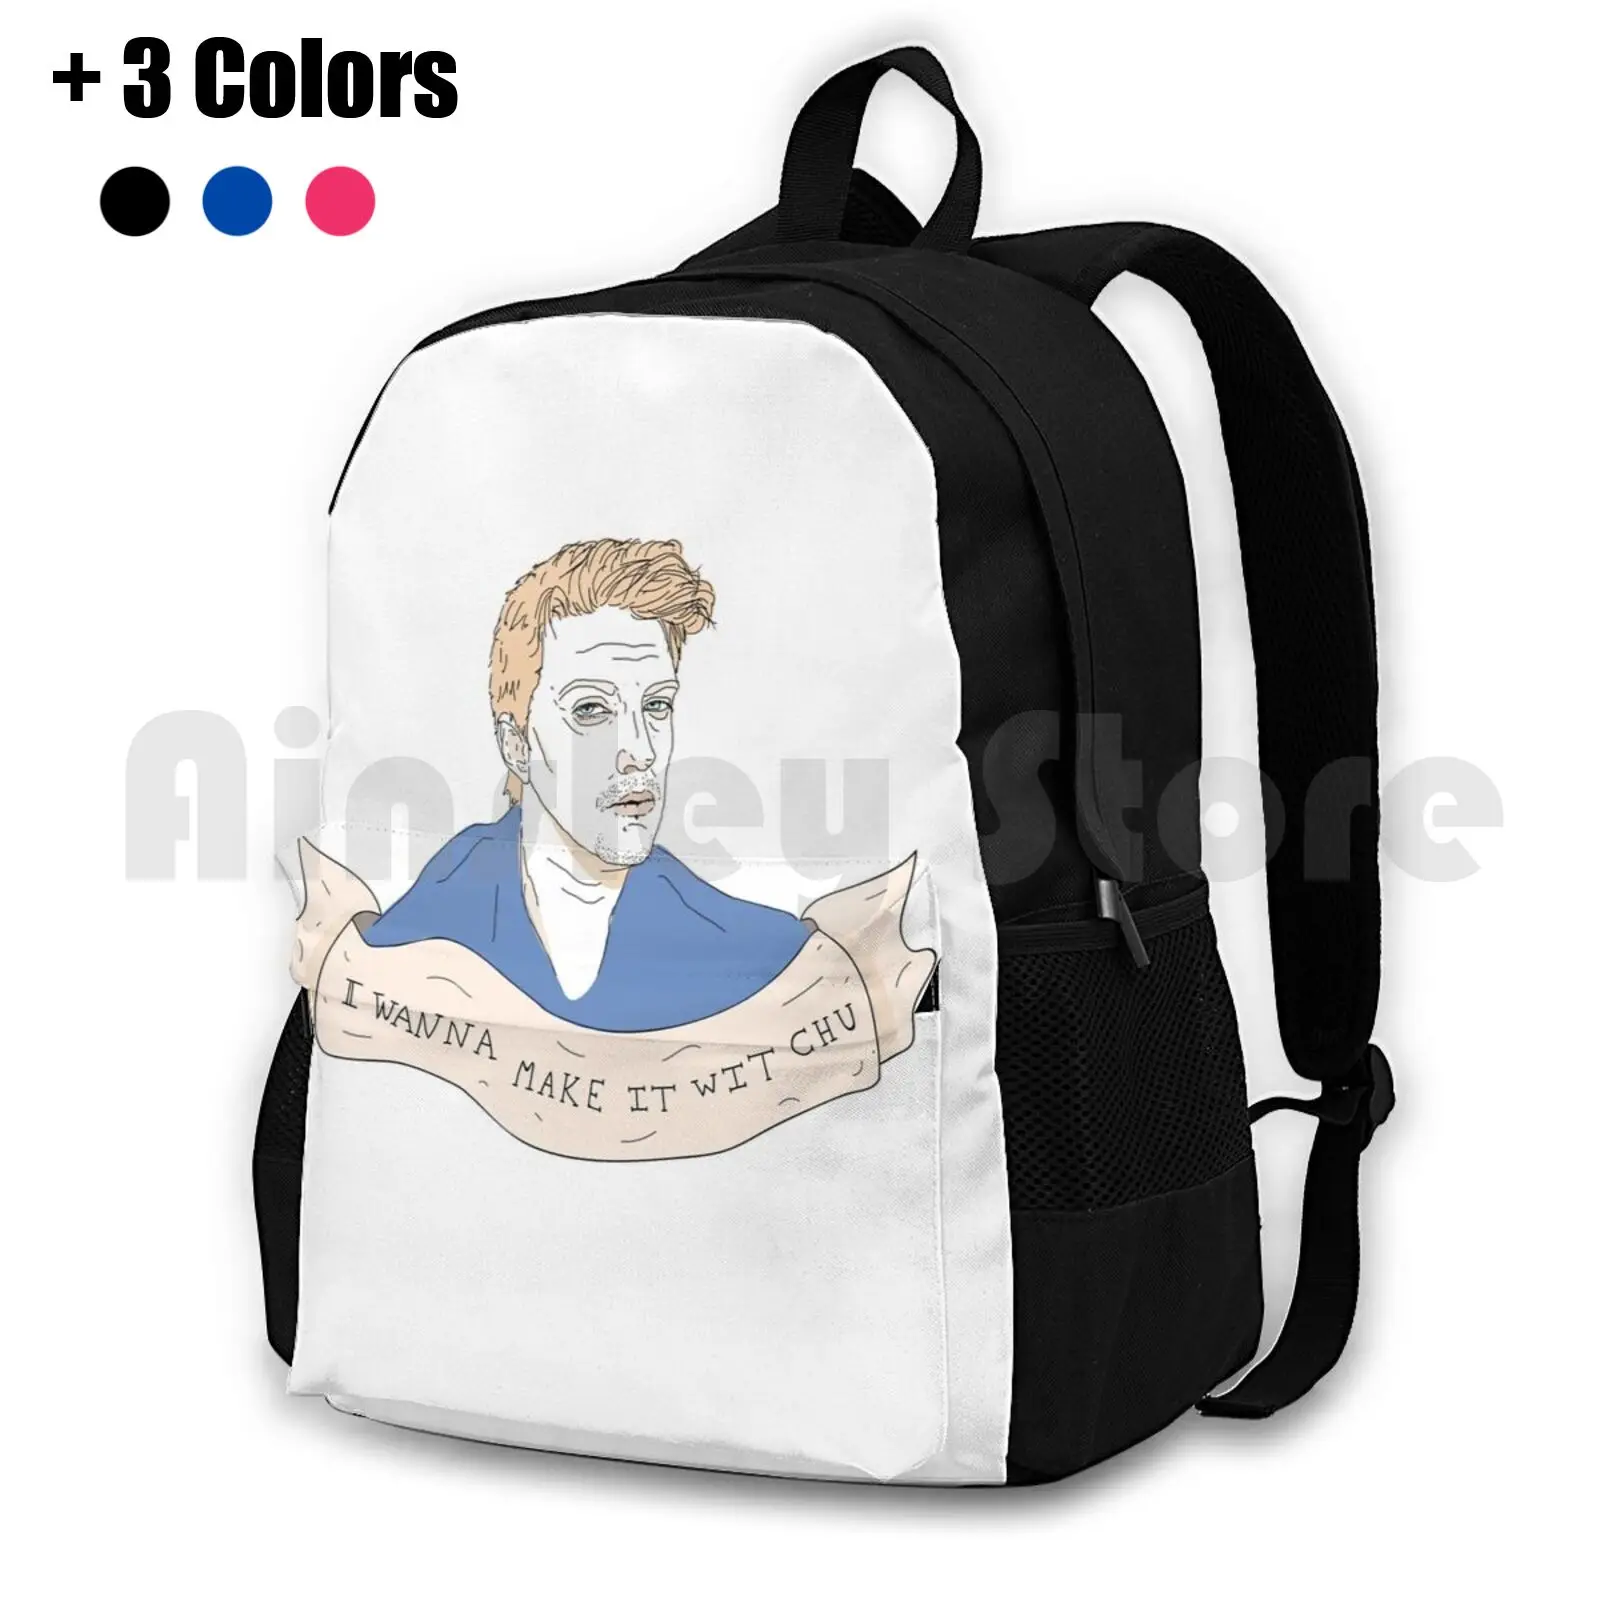 

I Wanna Make It Wit Chu Outdoor Hiking Backpack Waterproof Camping Travel Josh Homme Queens Stone Age Band Alternative Cool